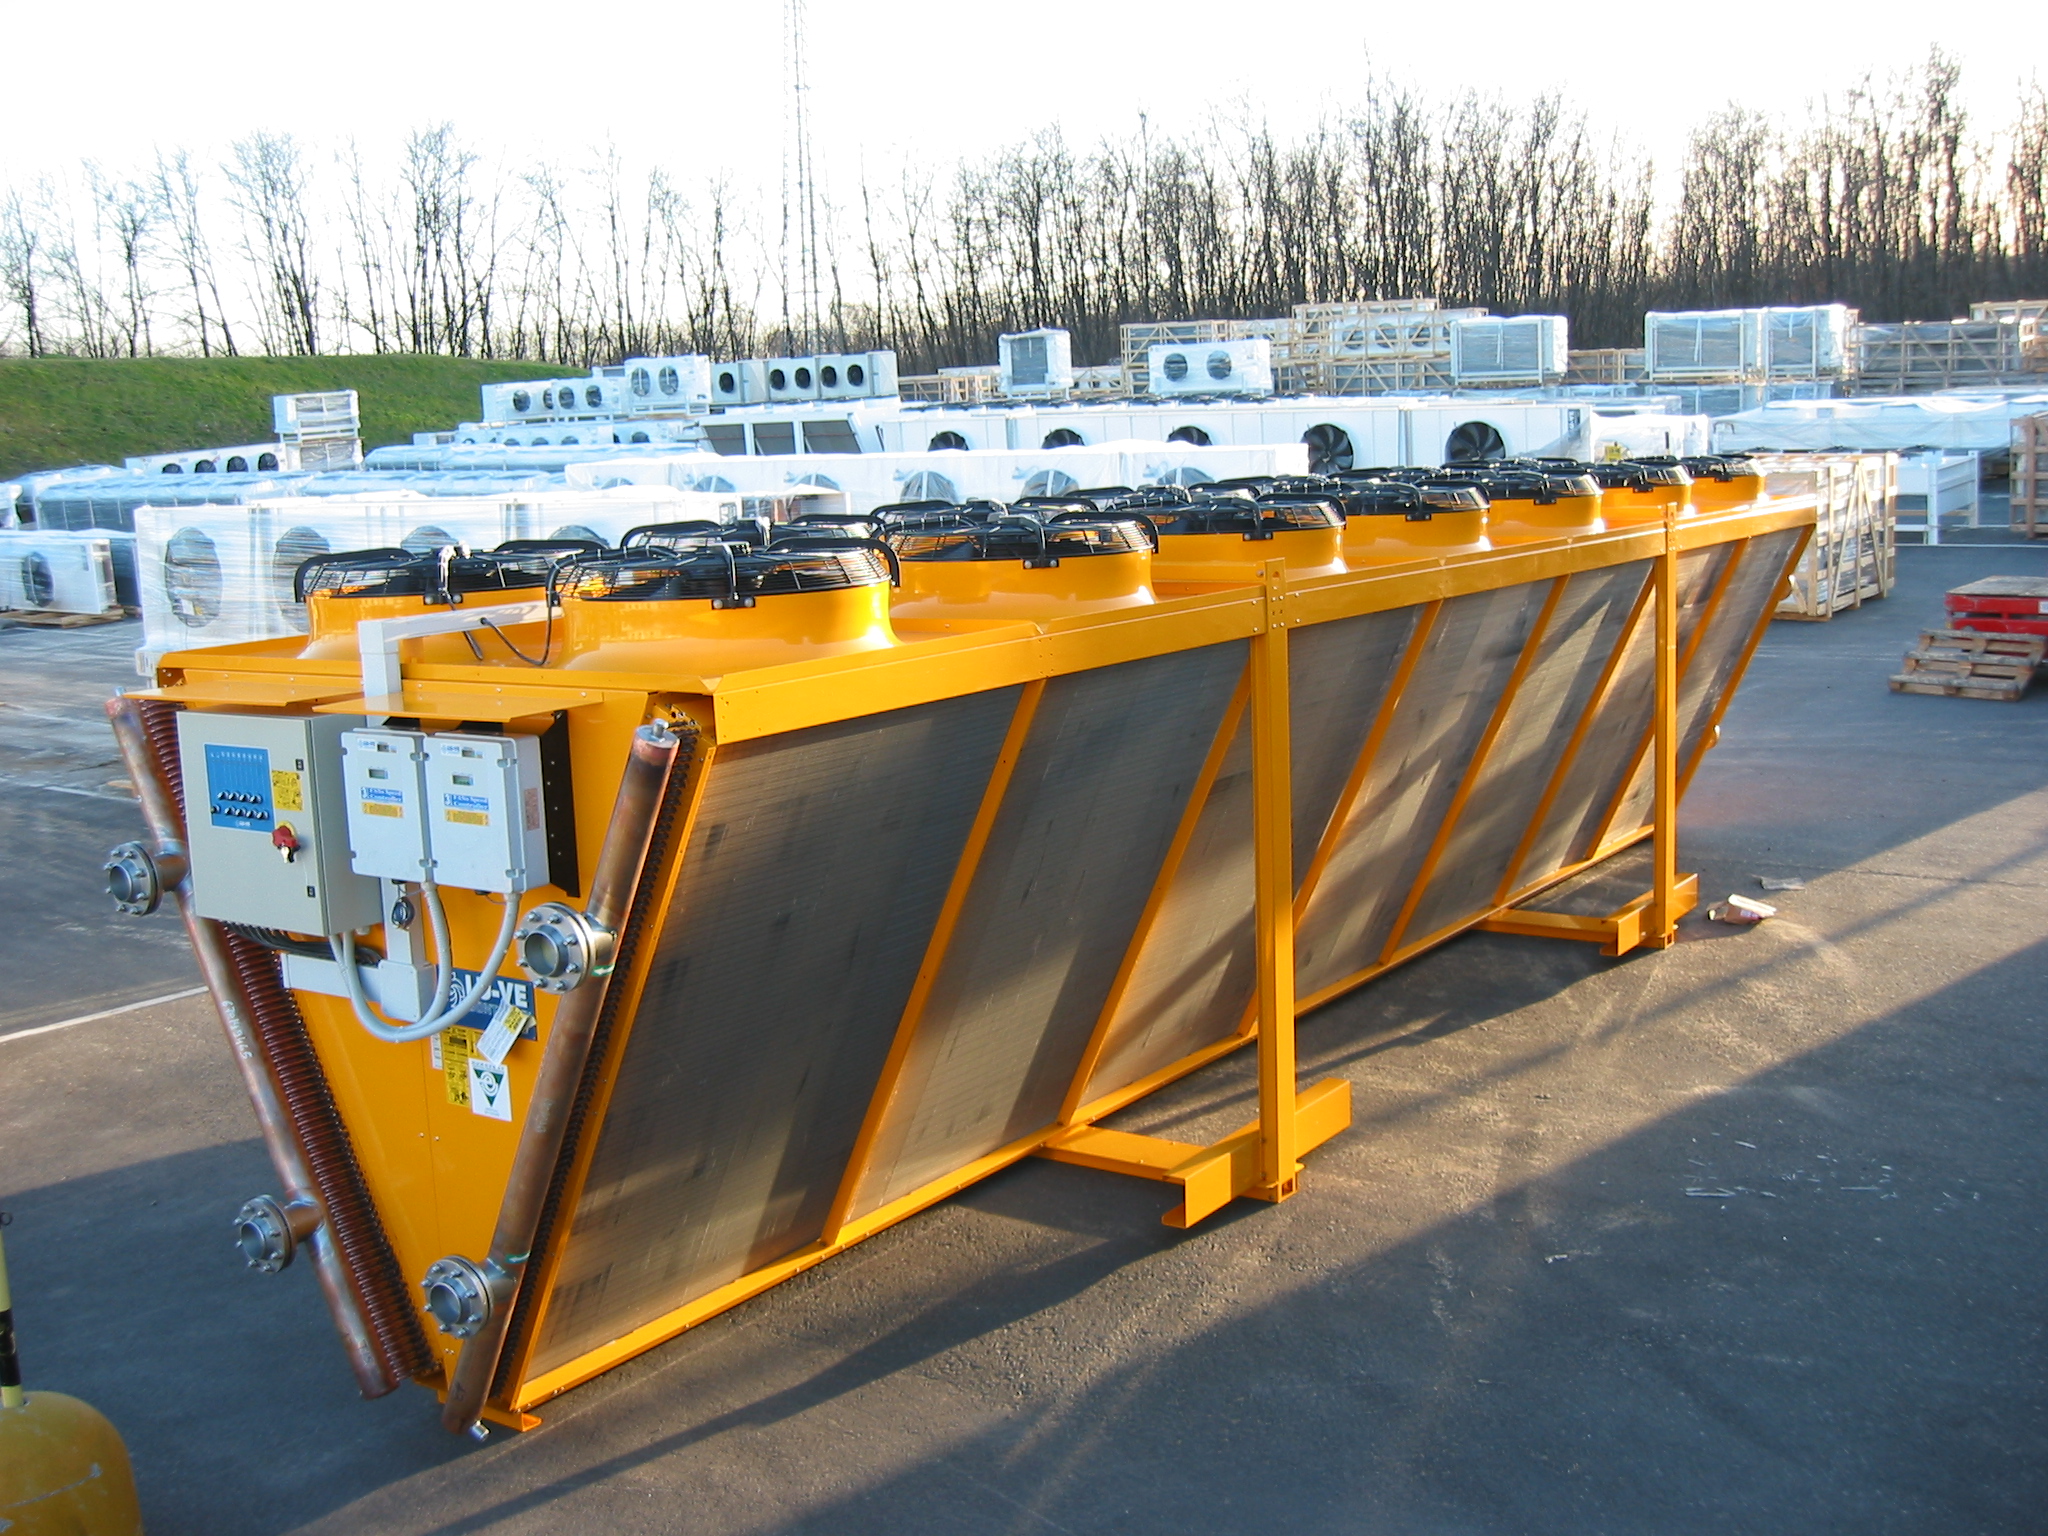 BIC - Paris - France - EHLD dry cooler ready for shipment